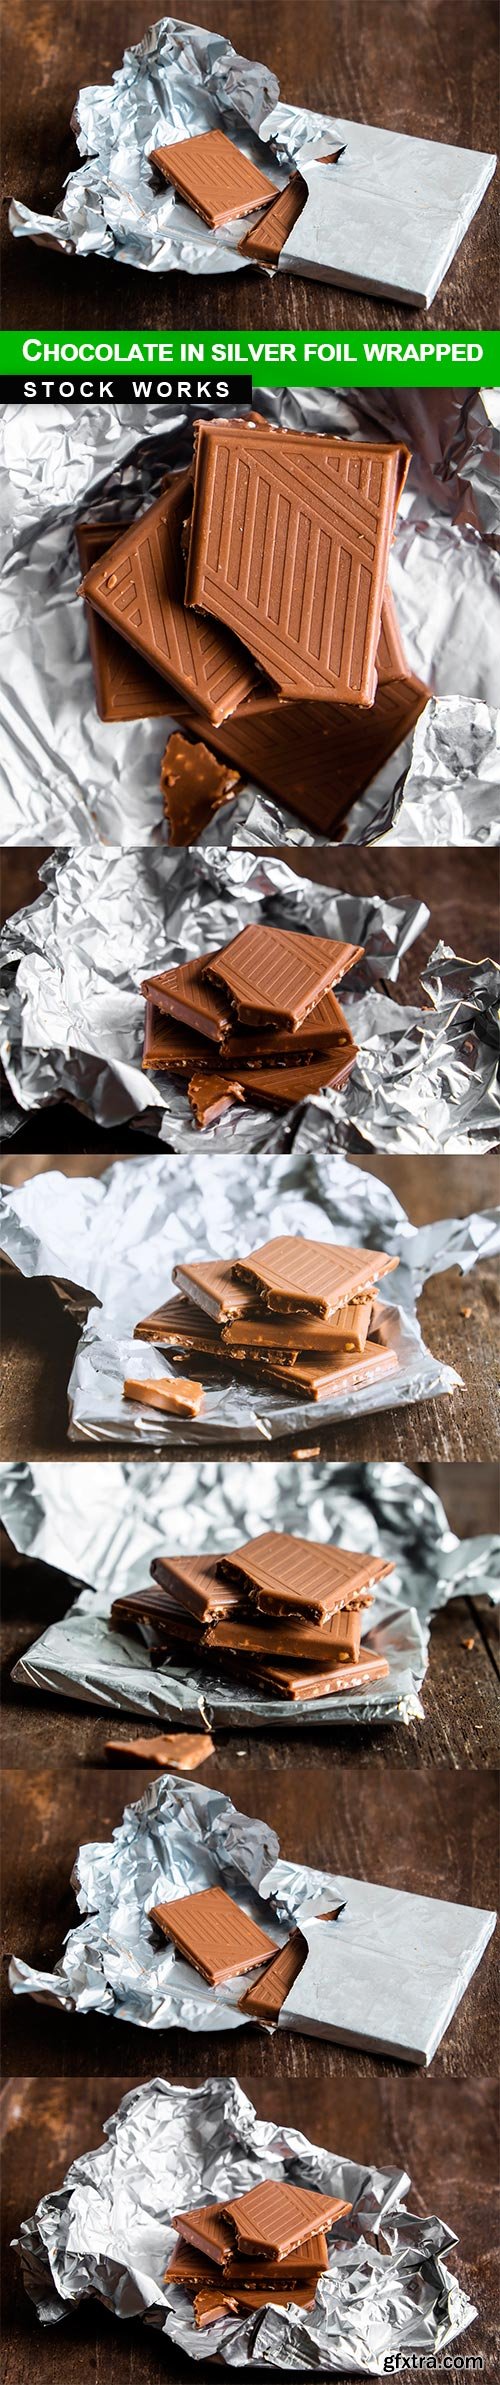 Chocolate in silver foil wrapped - 6 UHQ JPEG